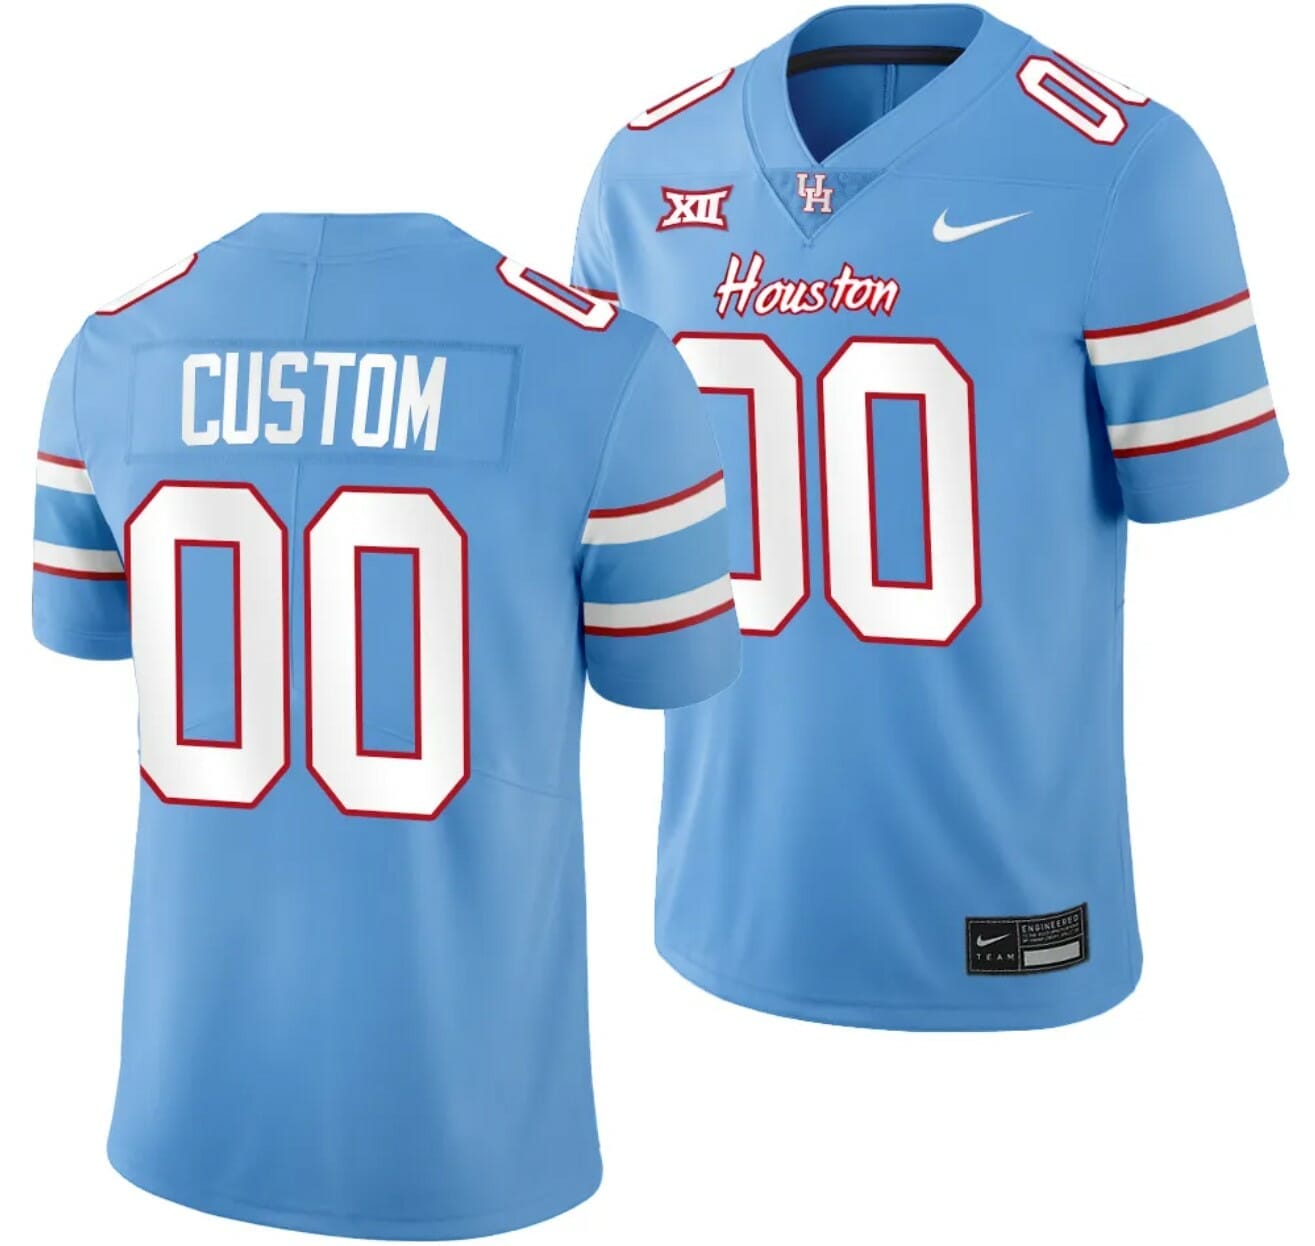 houston oilers jersey for sale